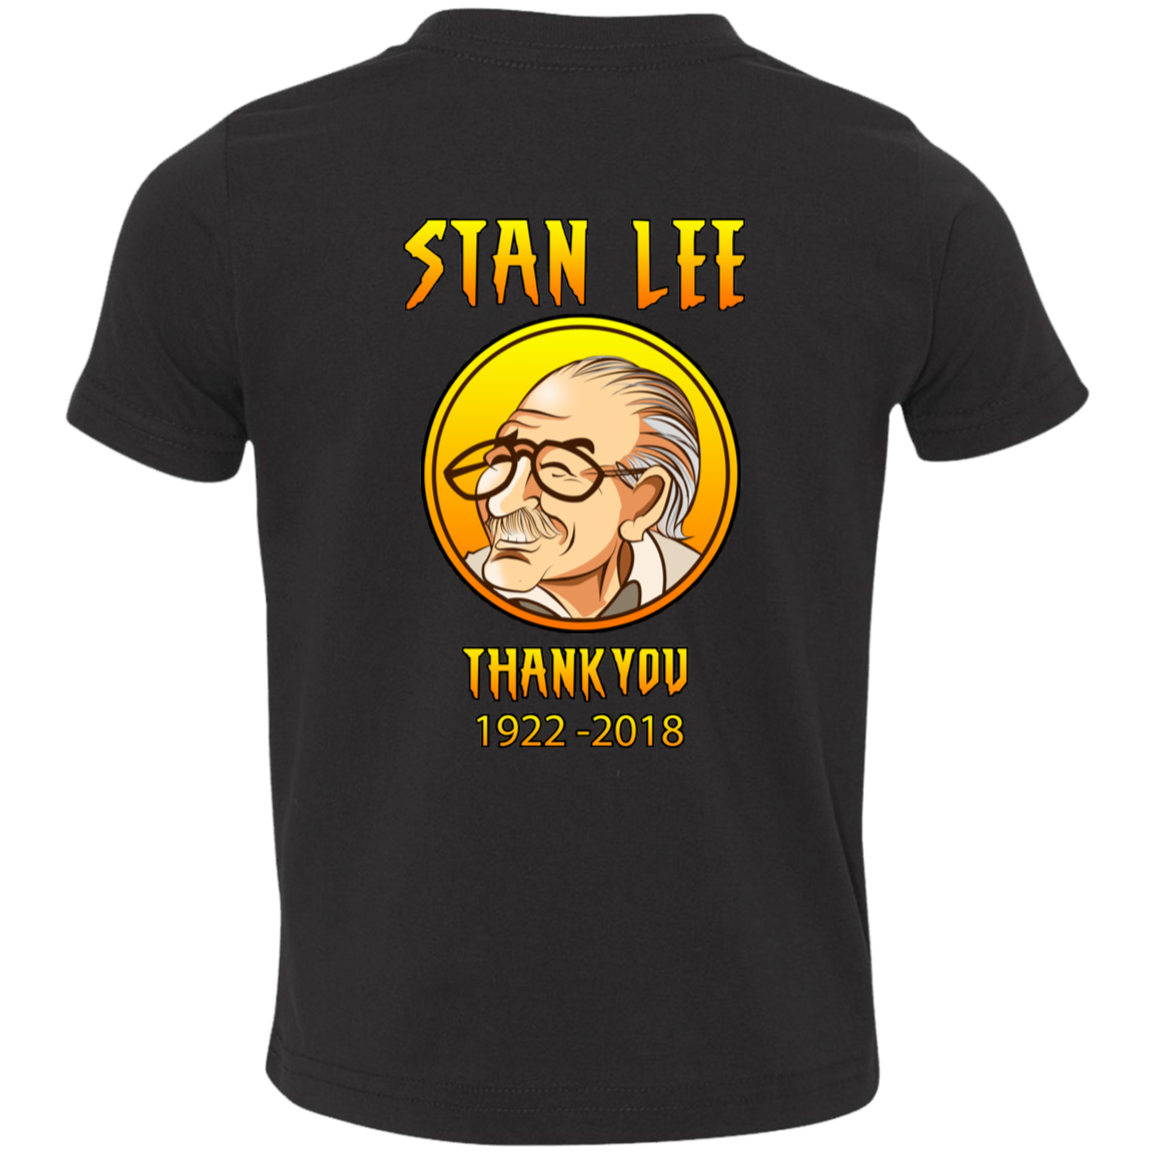 ArtichokeUSA Character and Font design. Stan Lee Thank You Fan Art. Let's Create Your Own Design Today. Toddler Jersey T-Shirt